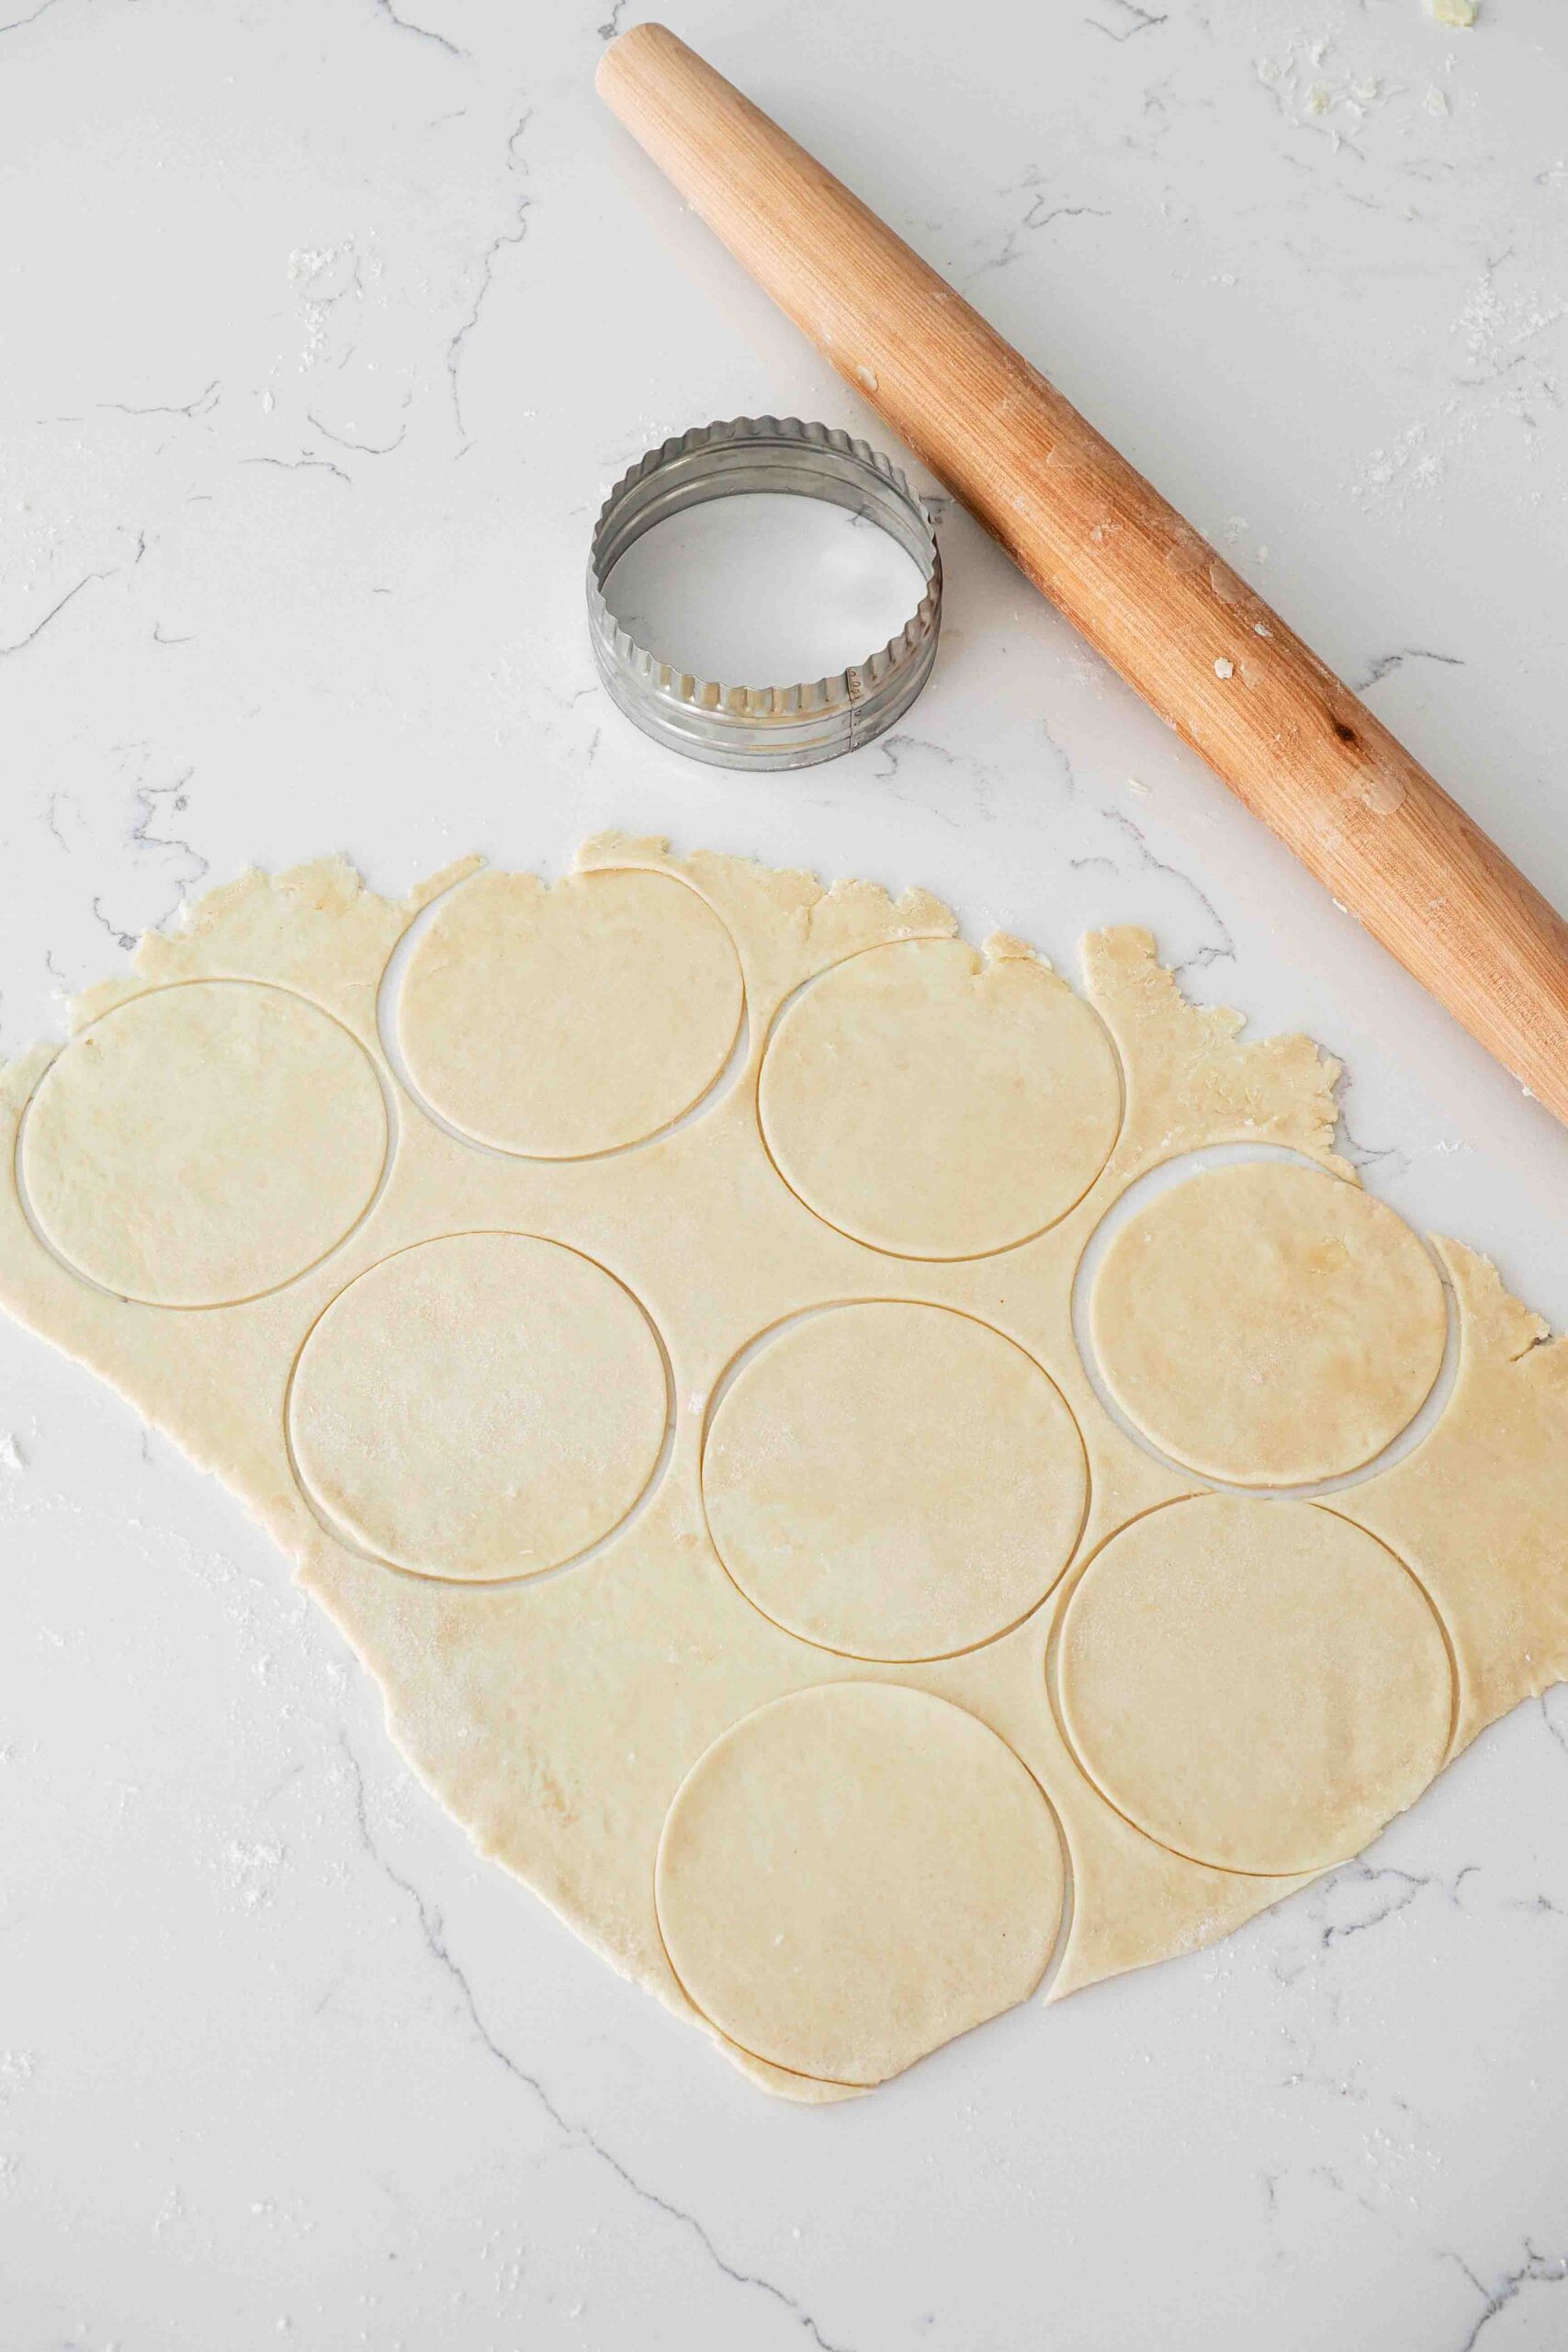 A round cutter near rolled out pie crust and a rolling pin.